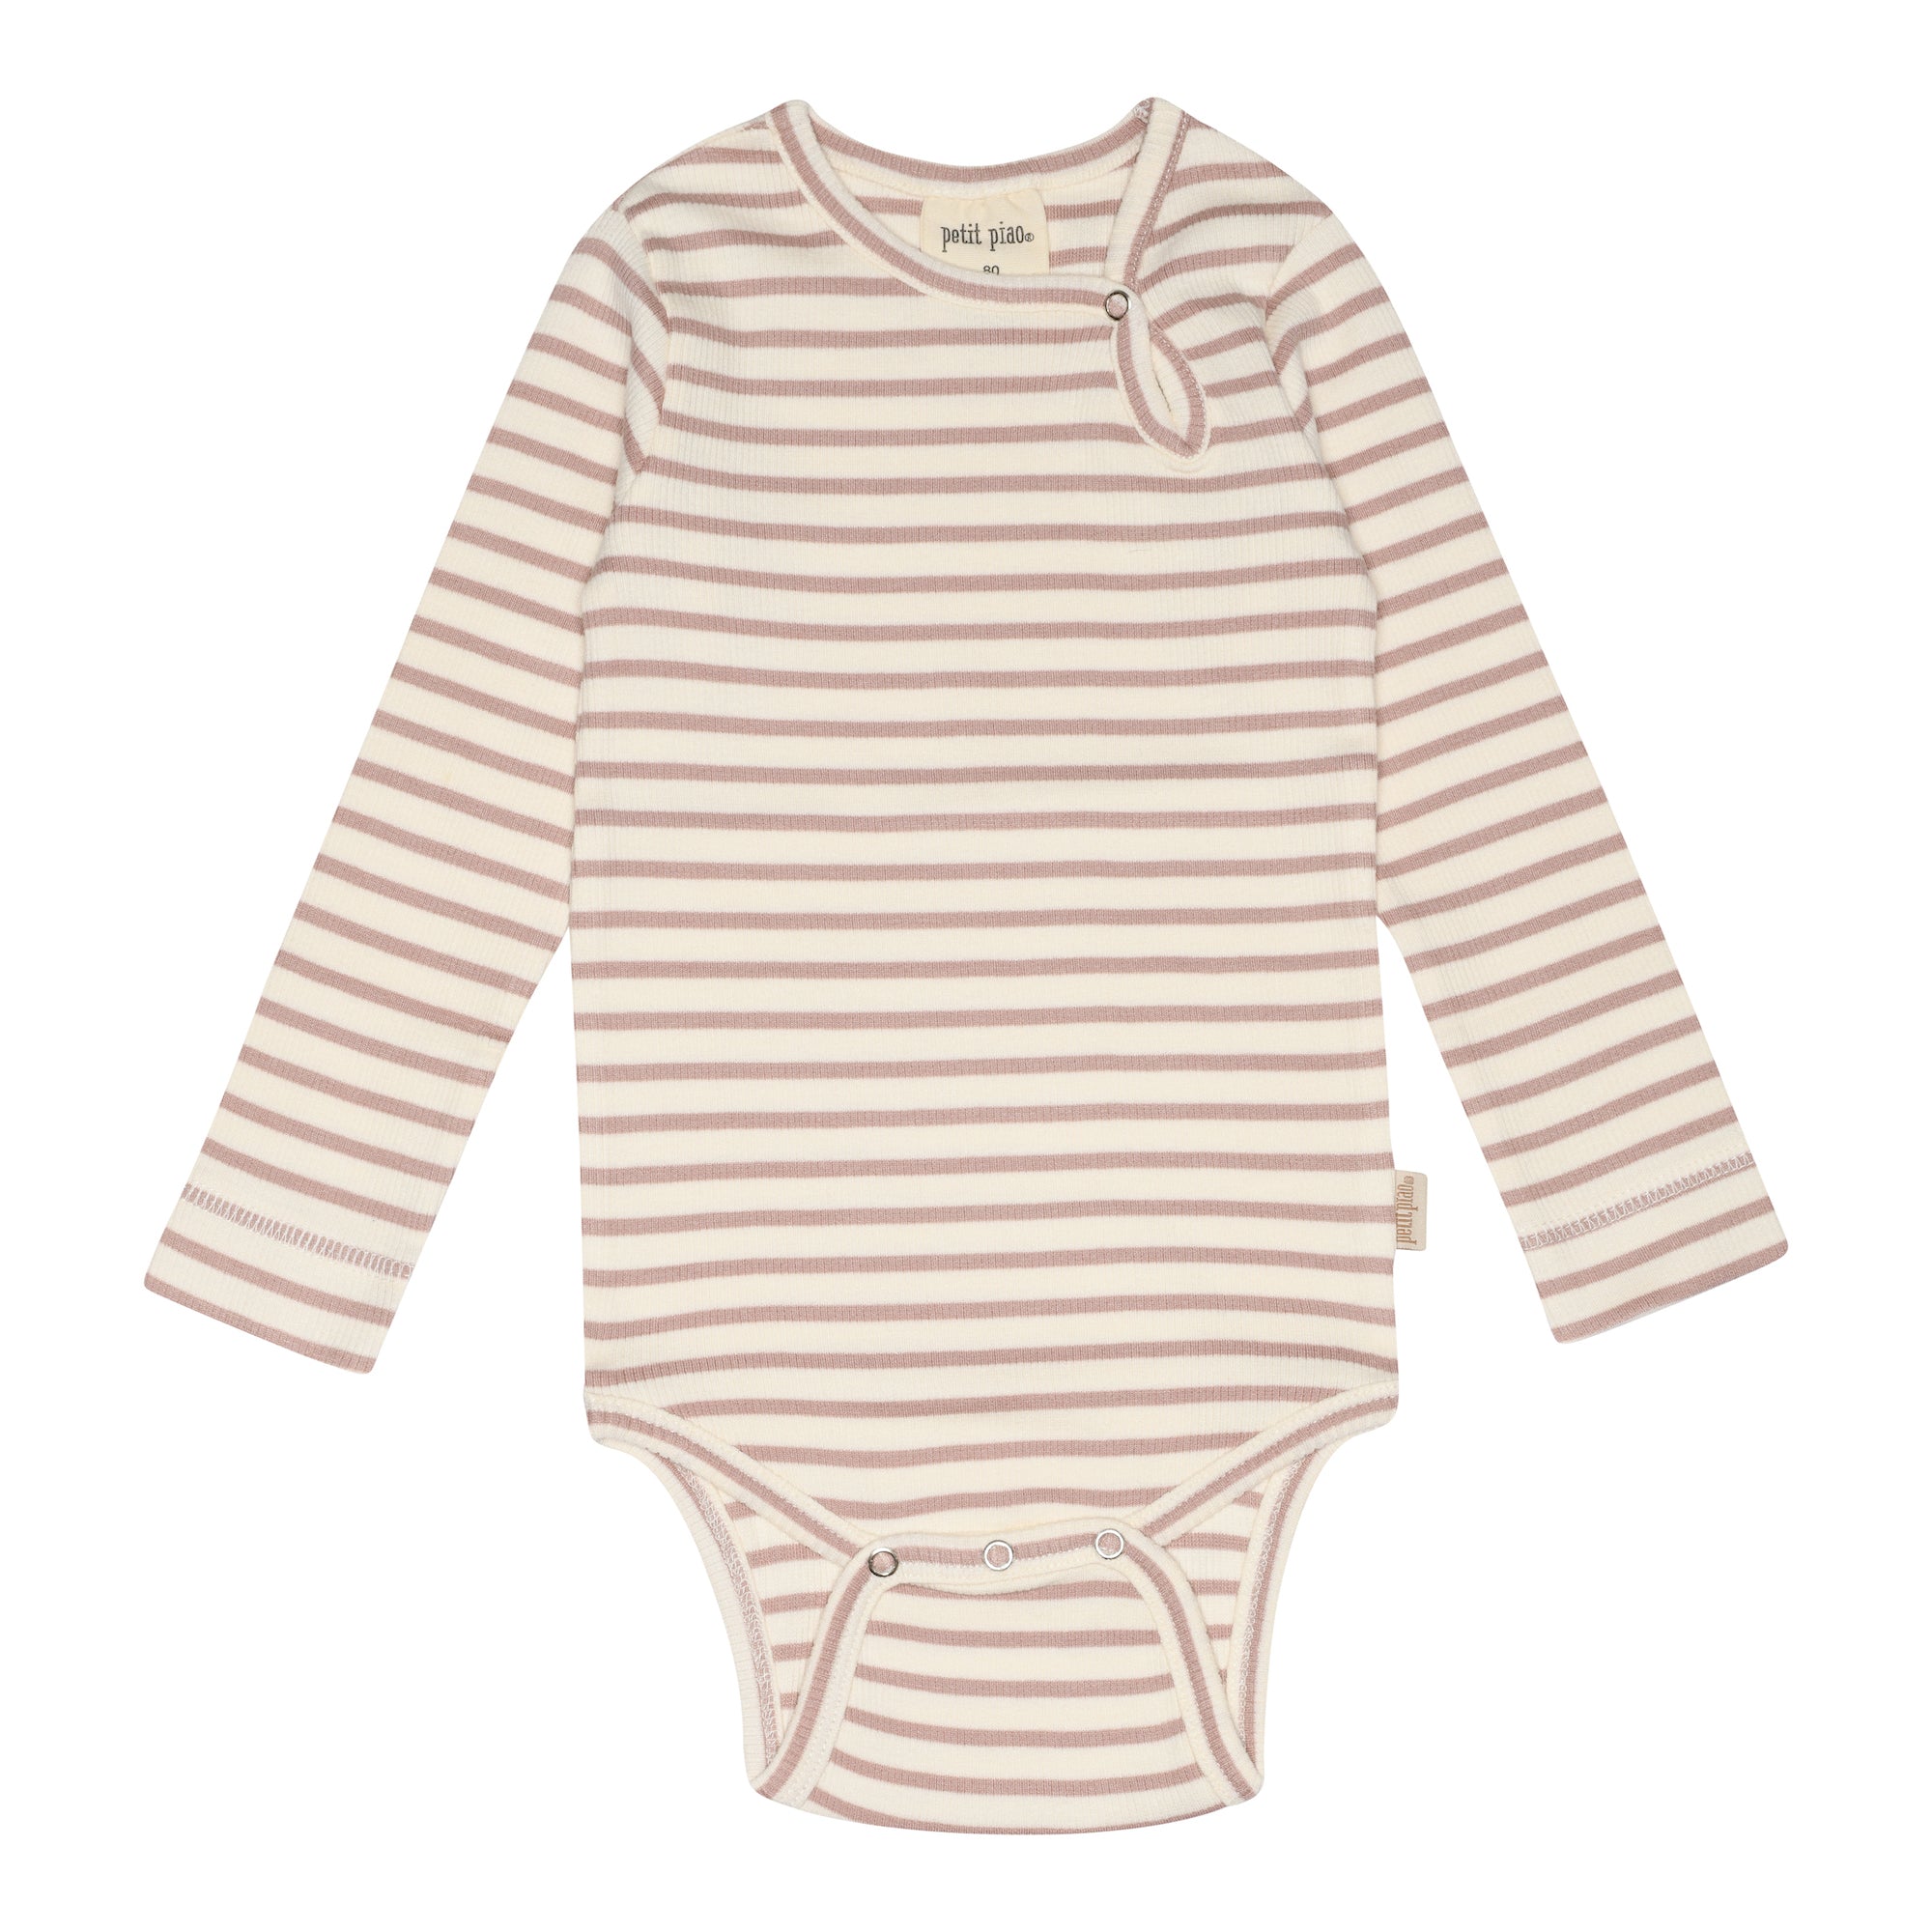 Petit Piao - Body LS Modal Striped, PP301 - Adobe Rose / Offwhite